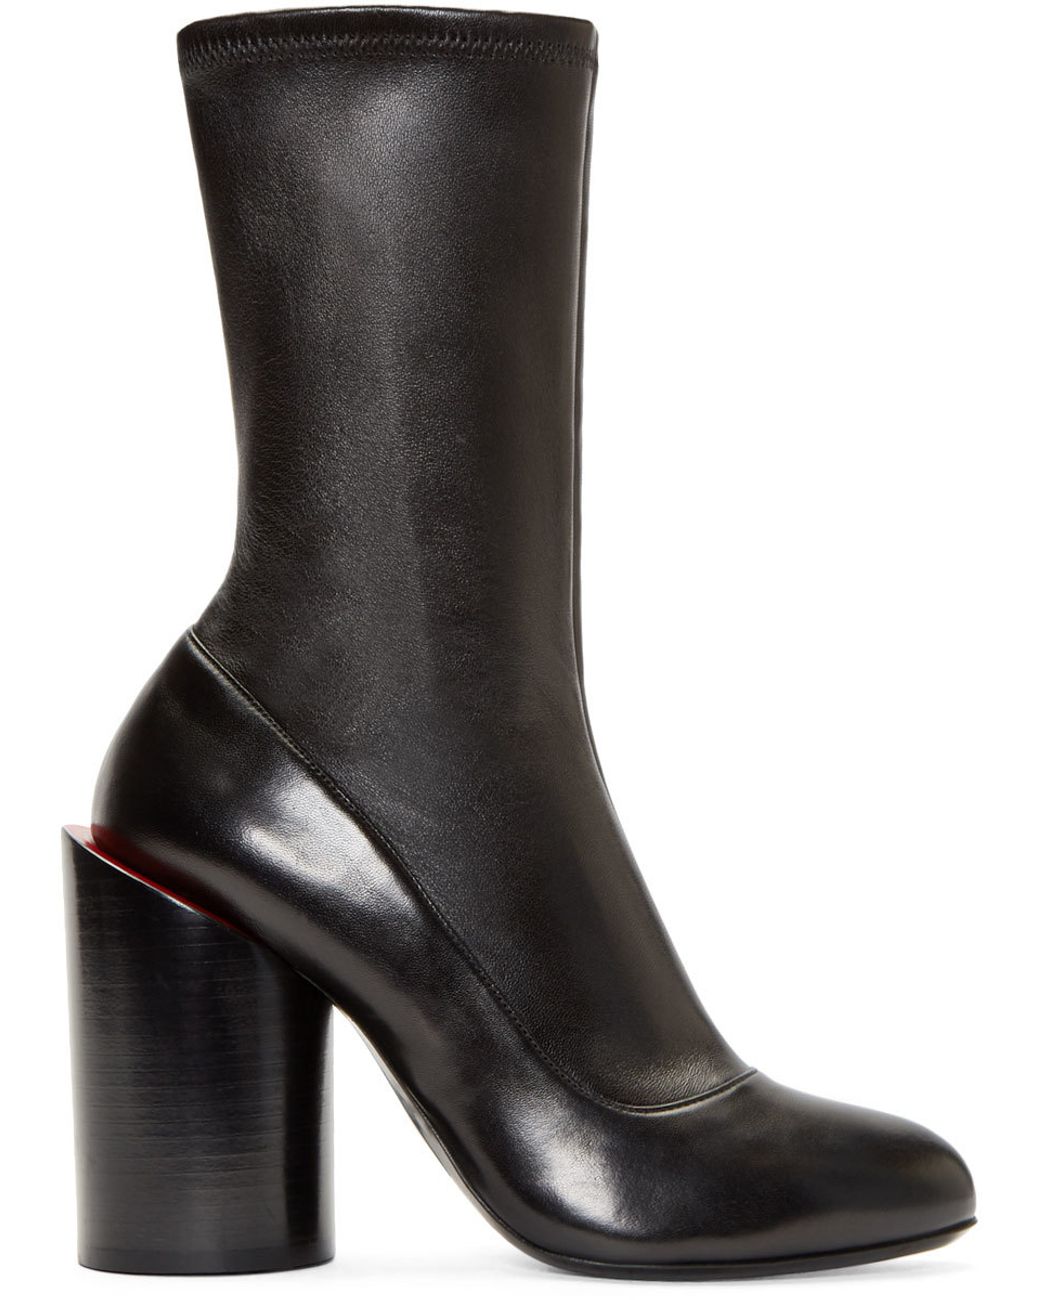 Givenchy Black Leather Wooden Heel Prive Boots | Lyst